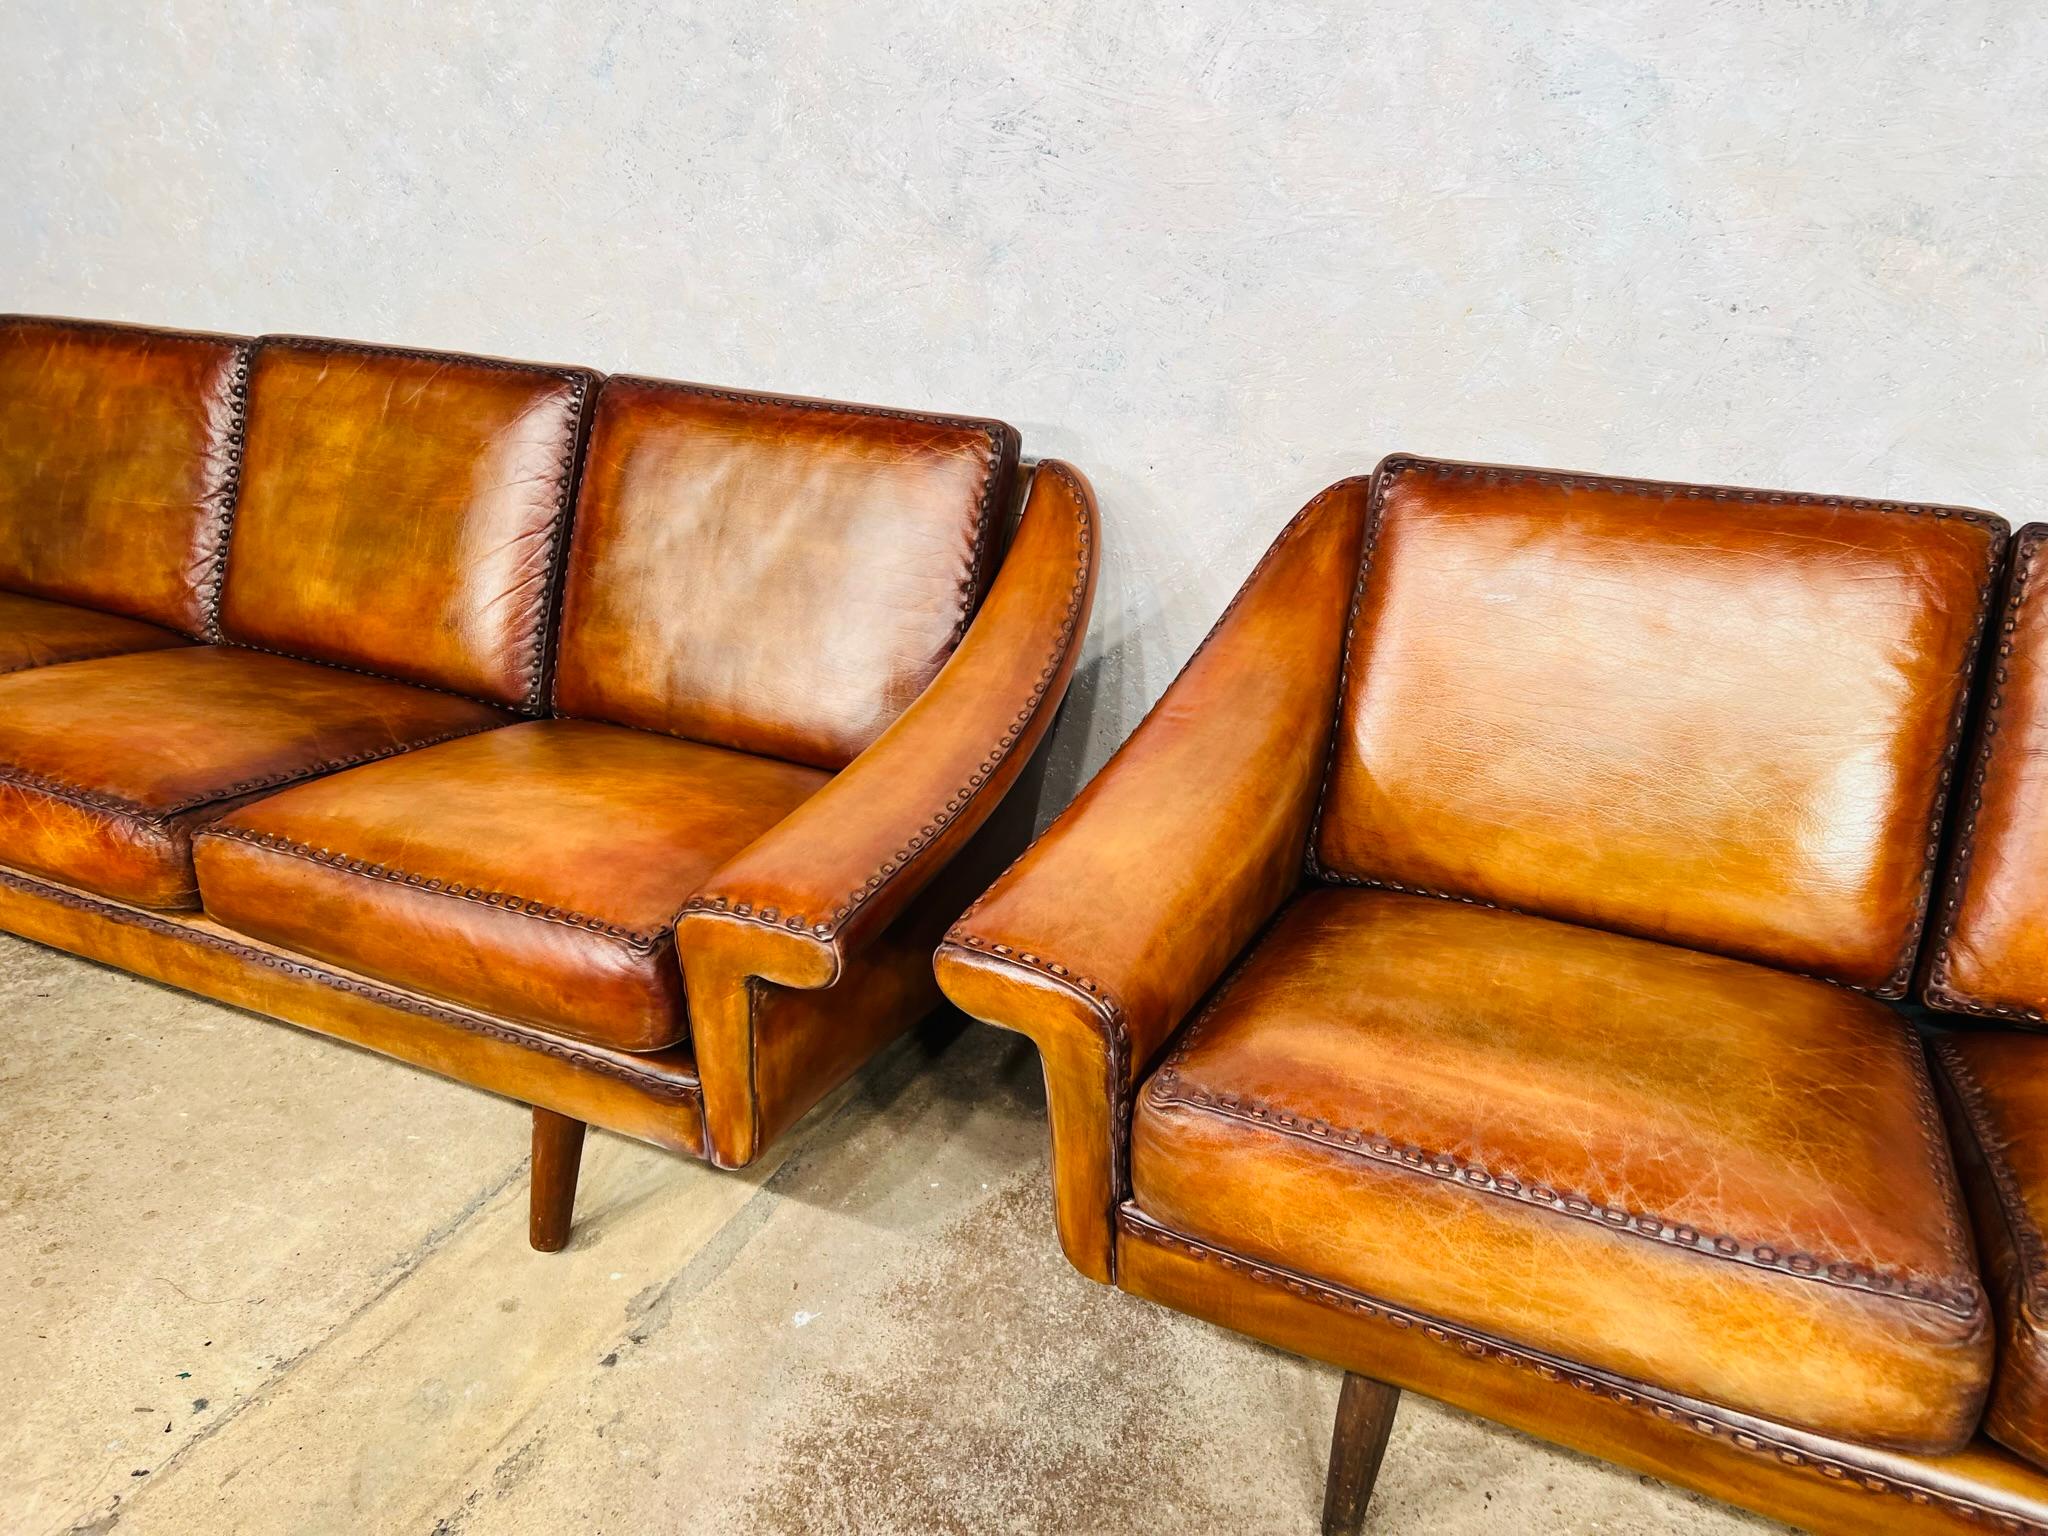 Pair Of Matador Leather 3 Seater Sofa by Aage Christiansen for Eran 1960s #642 For Sale 2